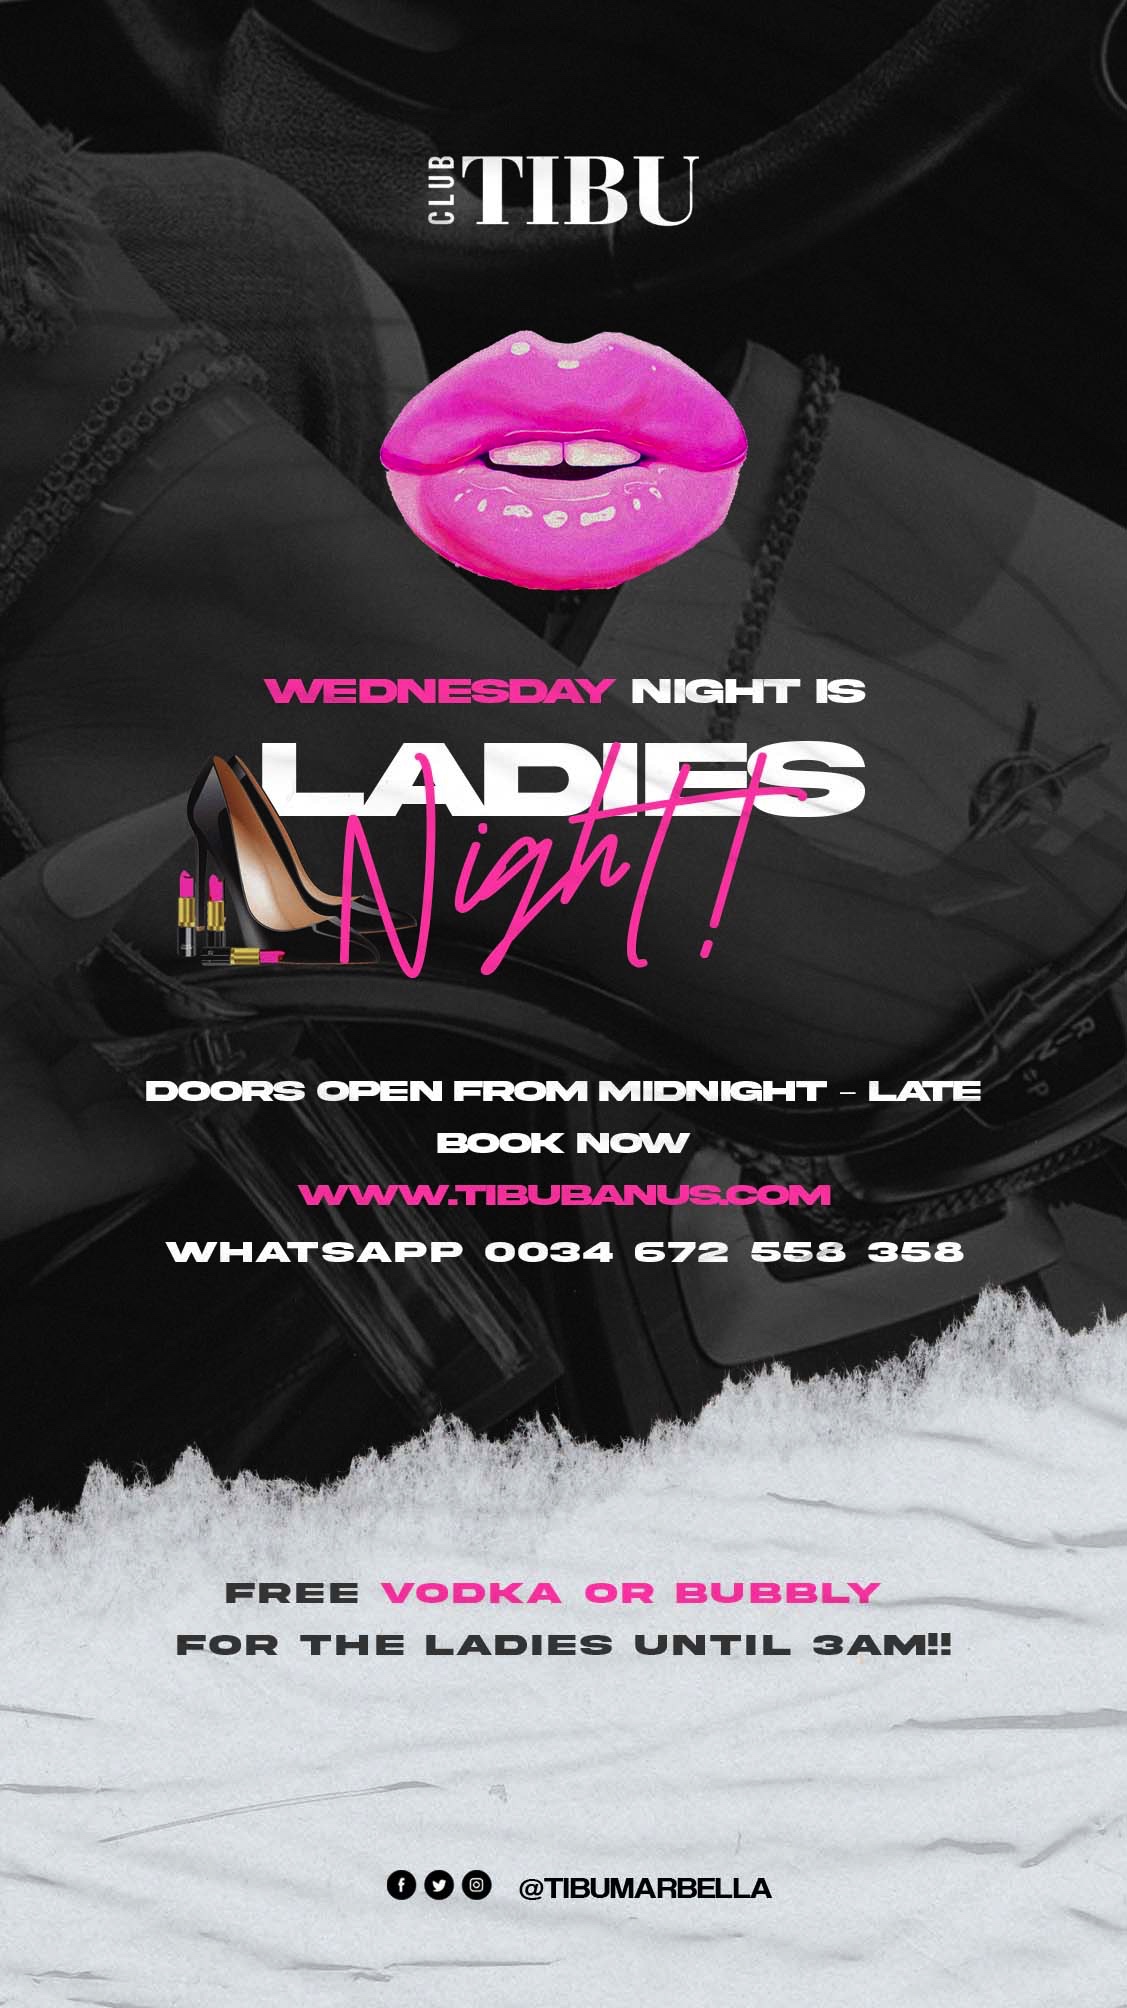 Ladies Night every Tuesday - Ladies drink free vodka or bubbly until 3 AM